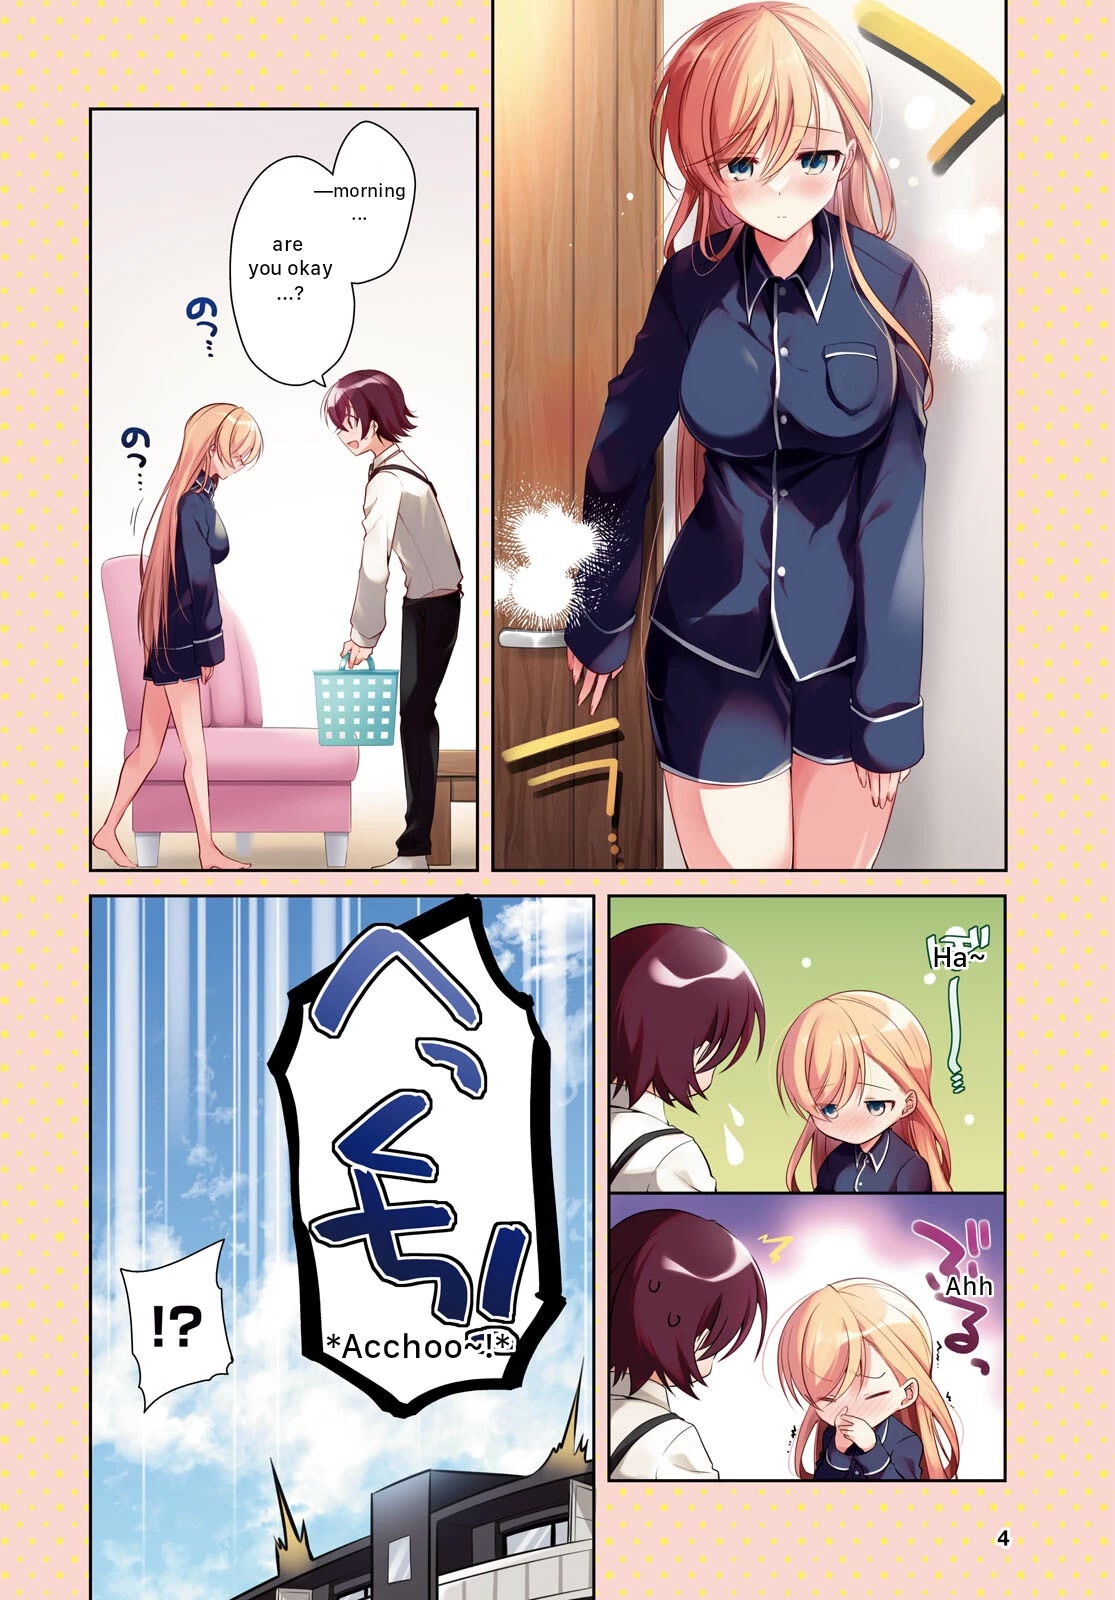 Isshiki-san Wants to Know About Love. - chapter 21 - #2